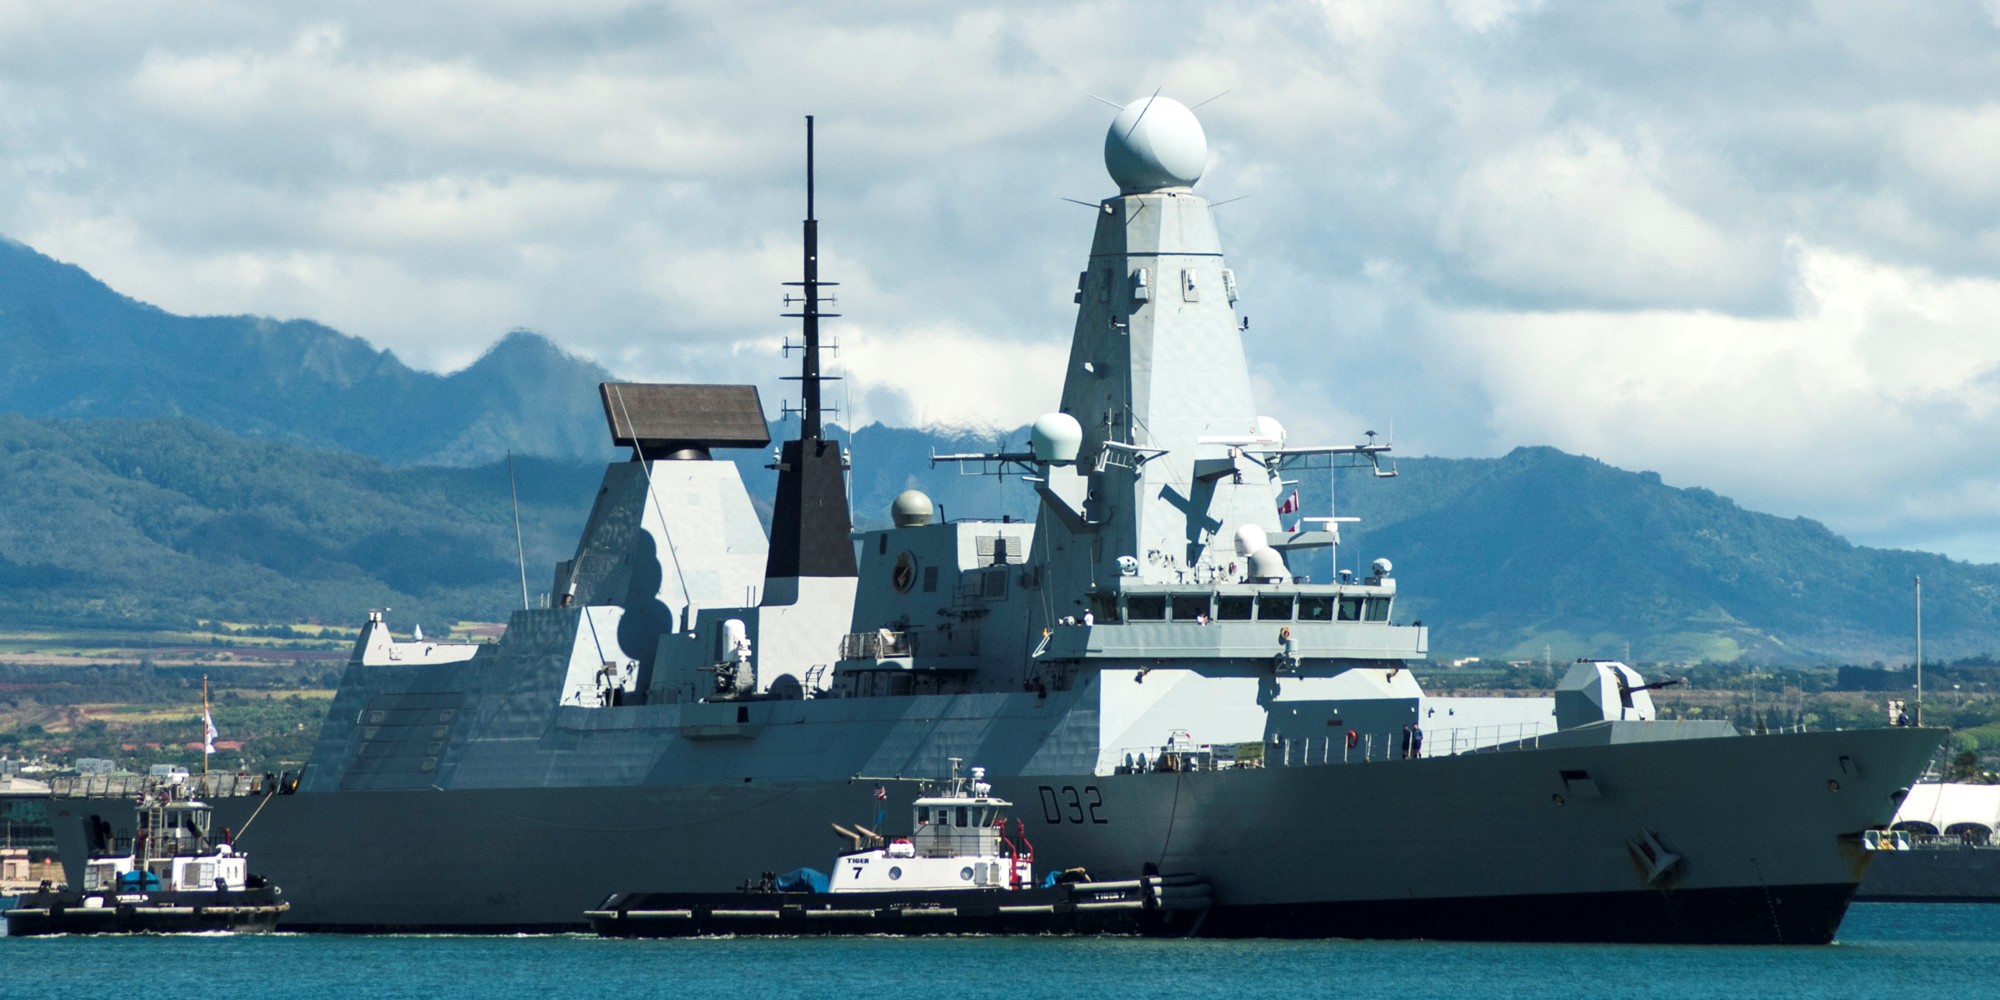 hms daring d-32 type 45 class guided missile destroyer royal navy sea viper paams 05 pearl harbor hawaii